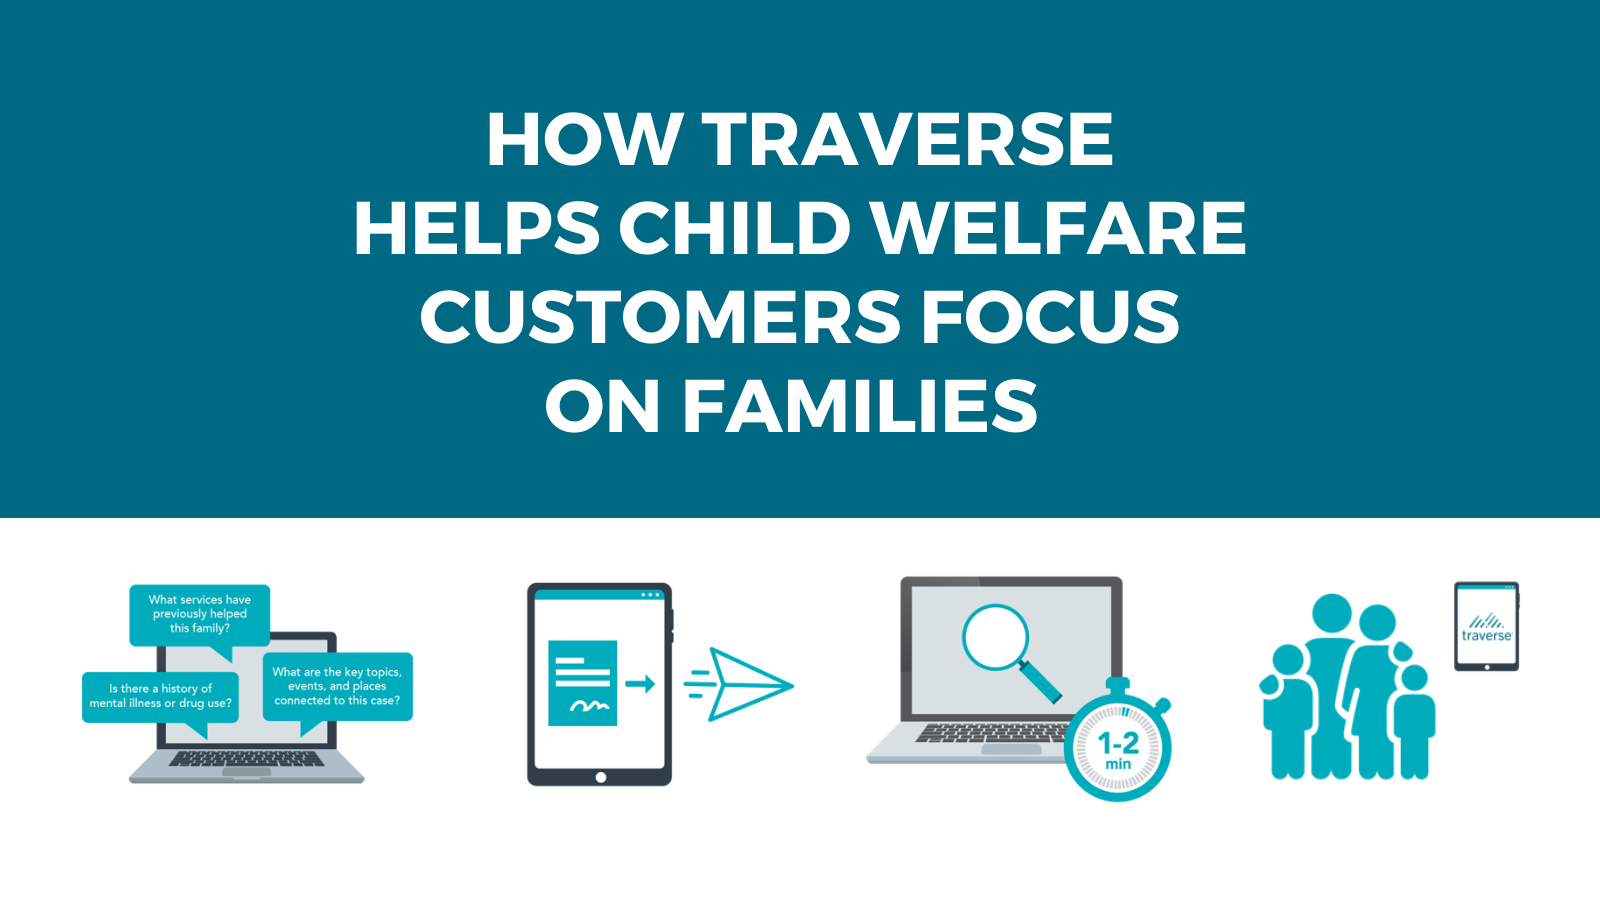 How Child Welfare Customers Say Traverse Helps Them Focus on Families